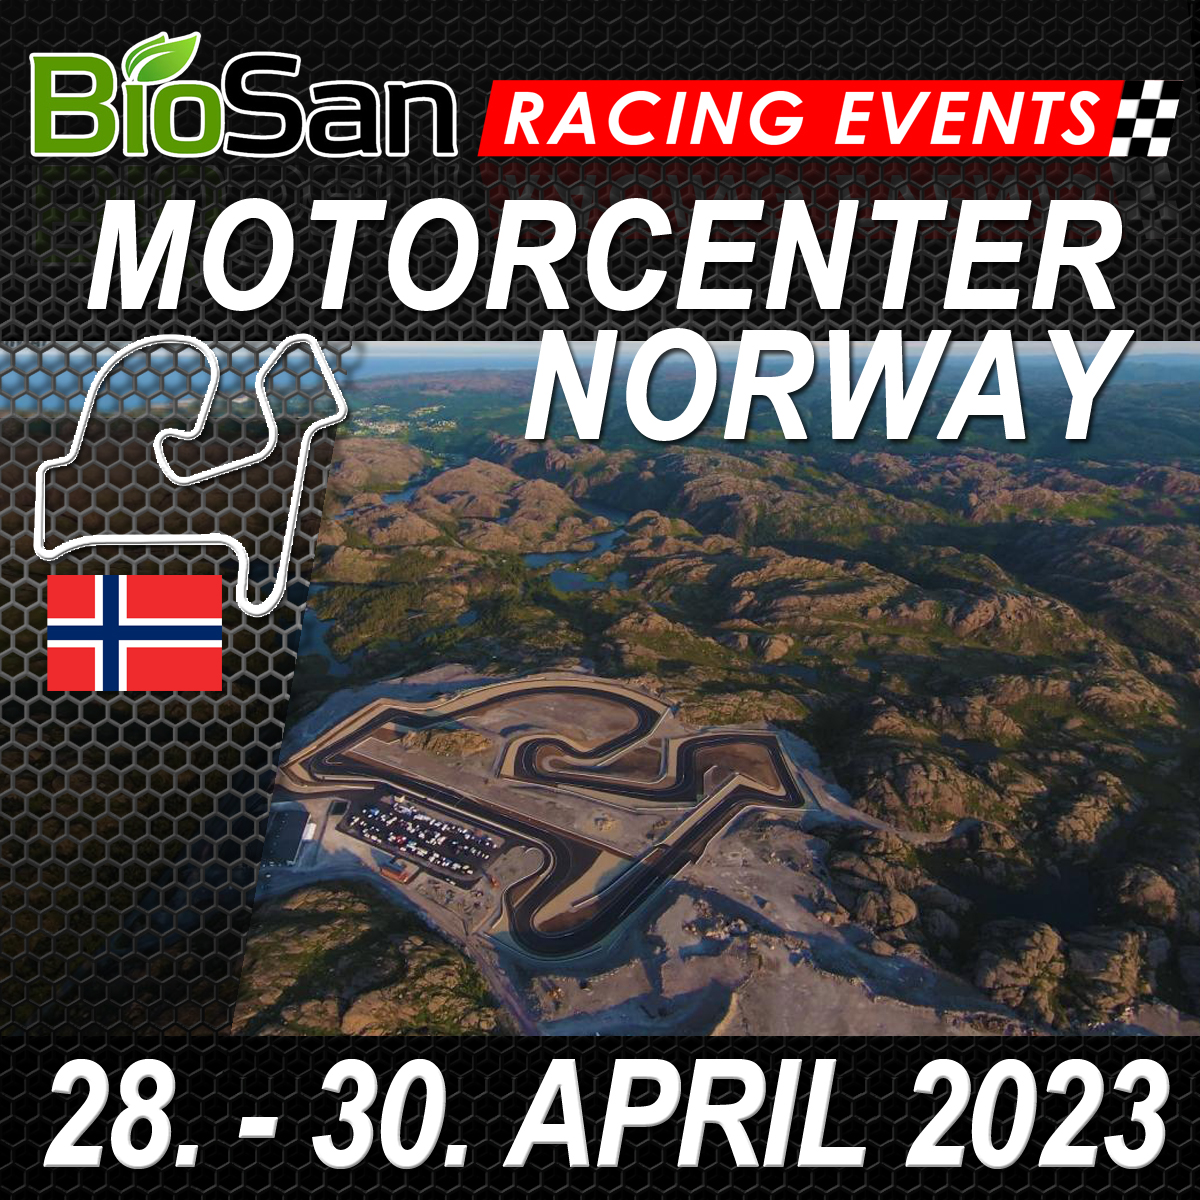 3 TRACKDAYS Motorcenter Norway with Licence